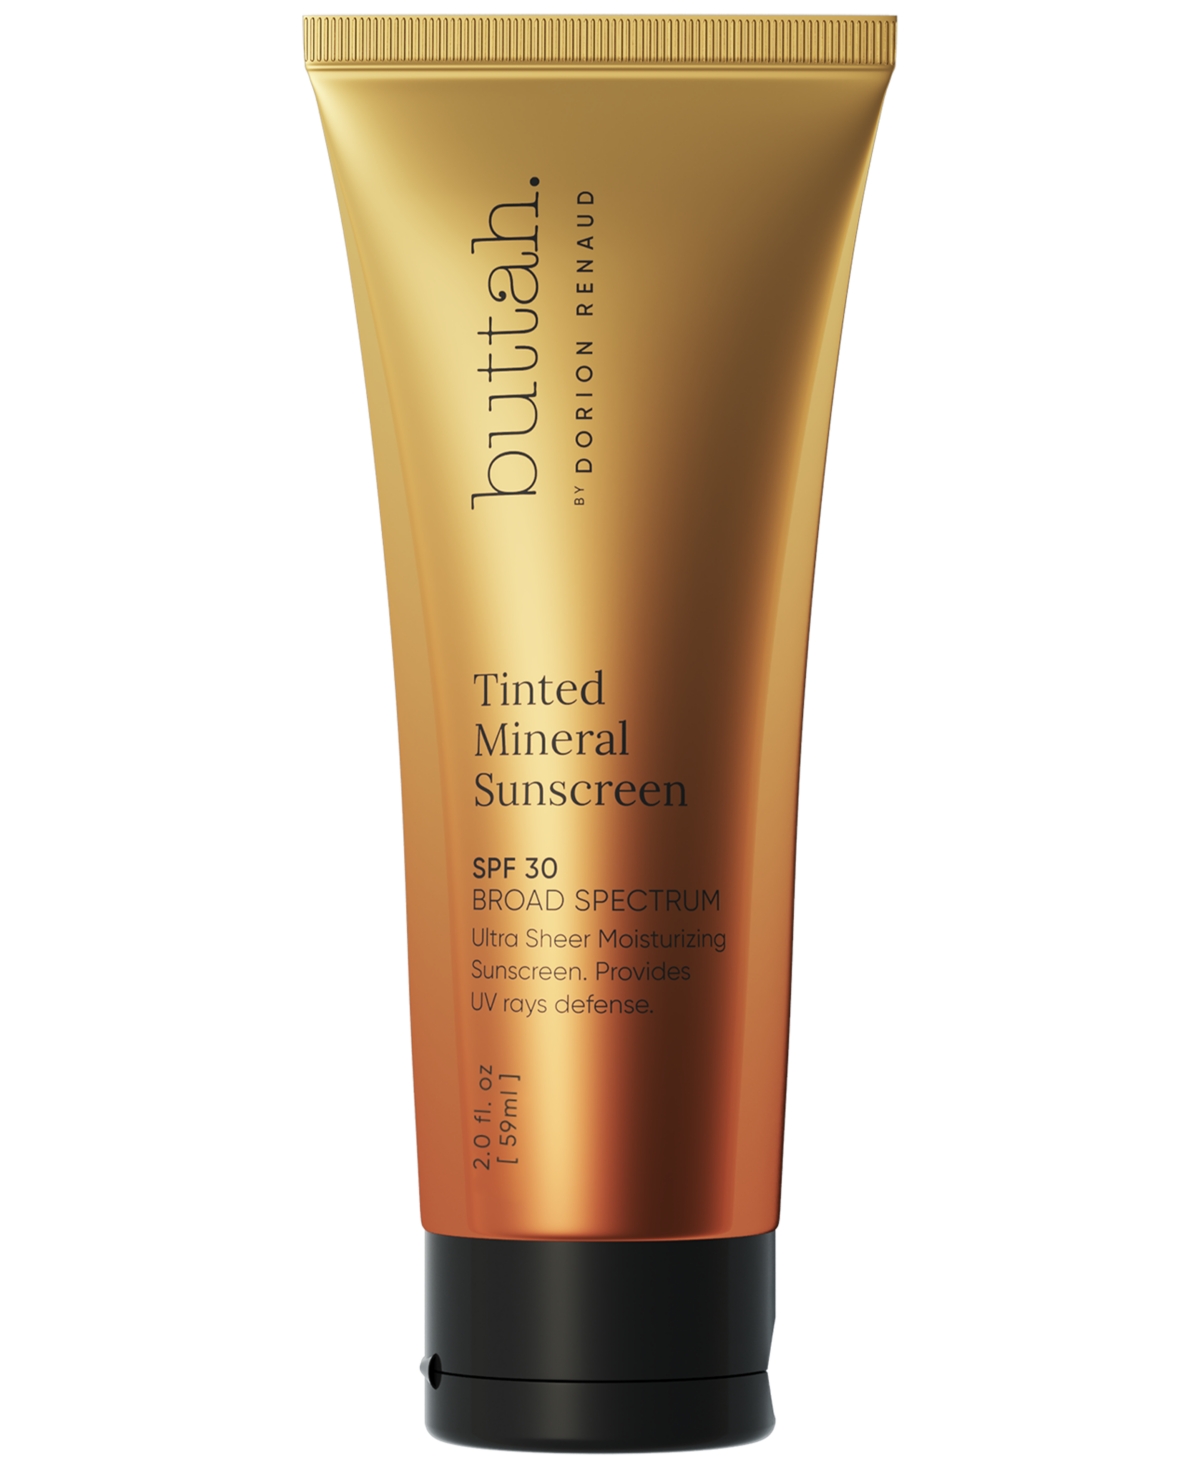 Tinted Mineral Sunscreen Spf 30, 59 ml